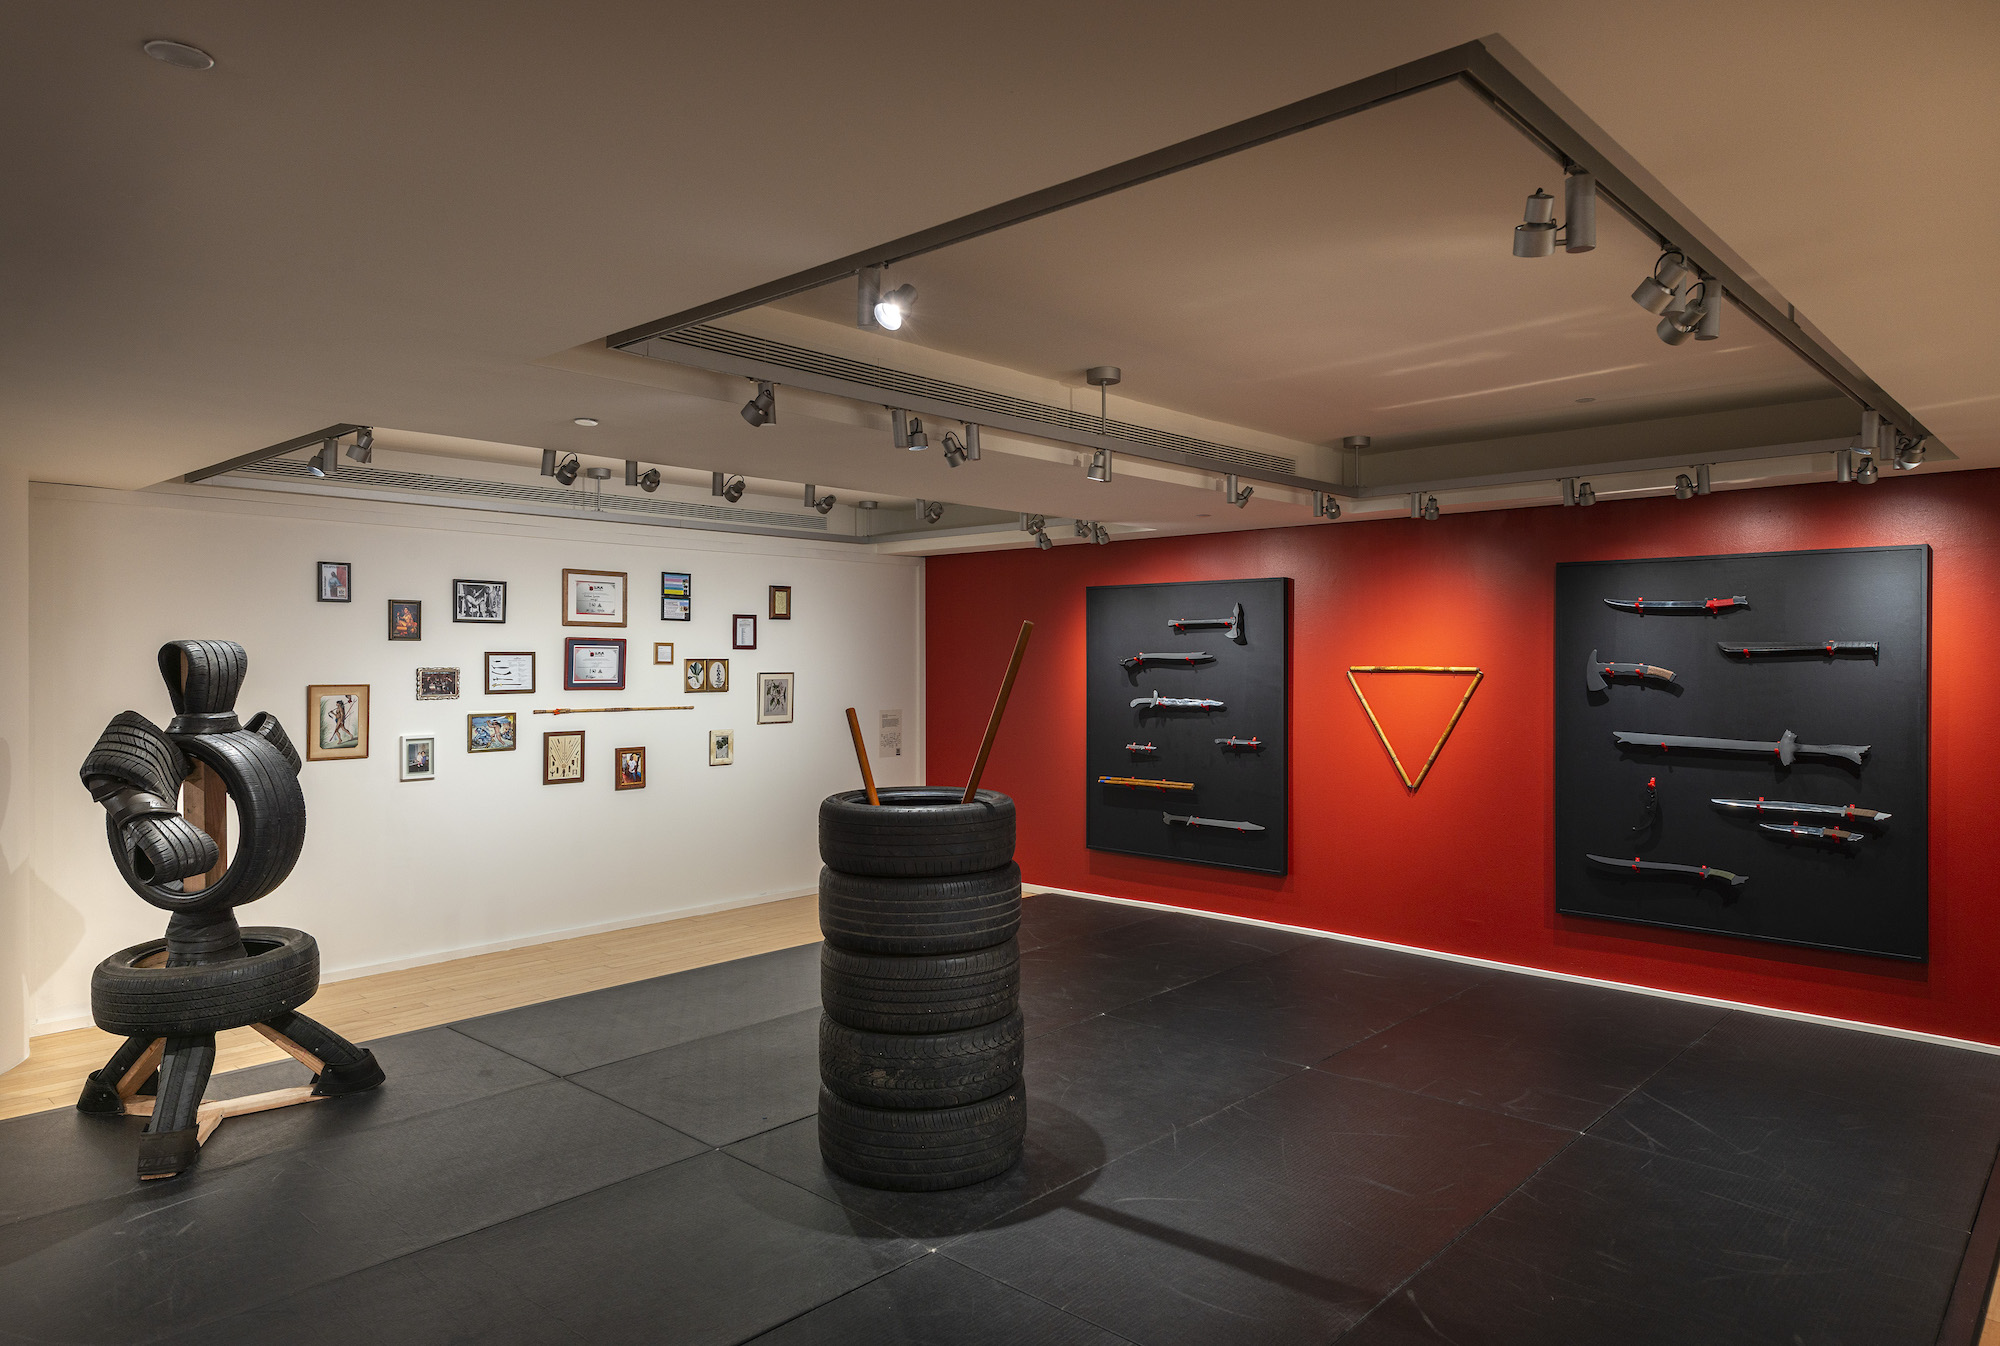 A gallery with a stack of tires in the center, a tire dummy sculpture next to it, as well as training weapons in a red wall and framed images on the adjacent wall.